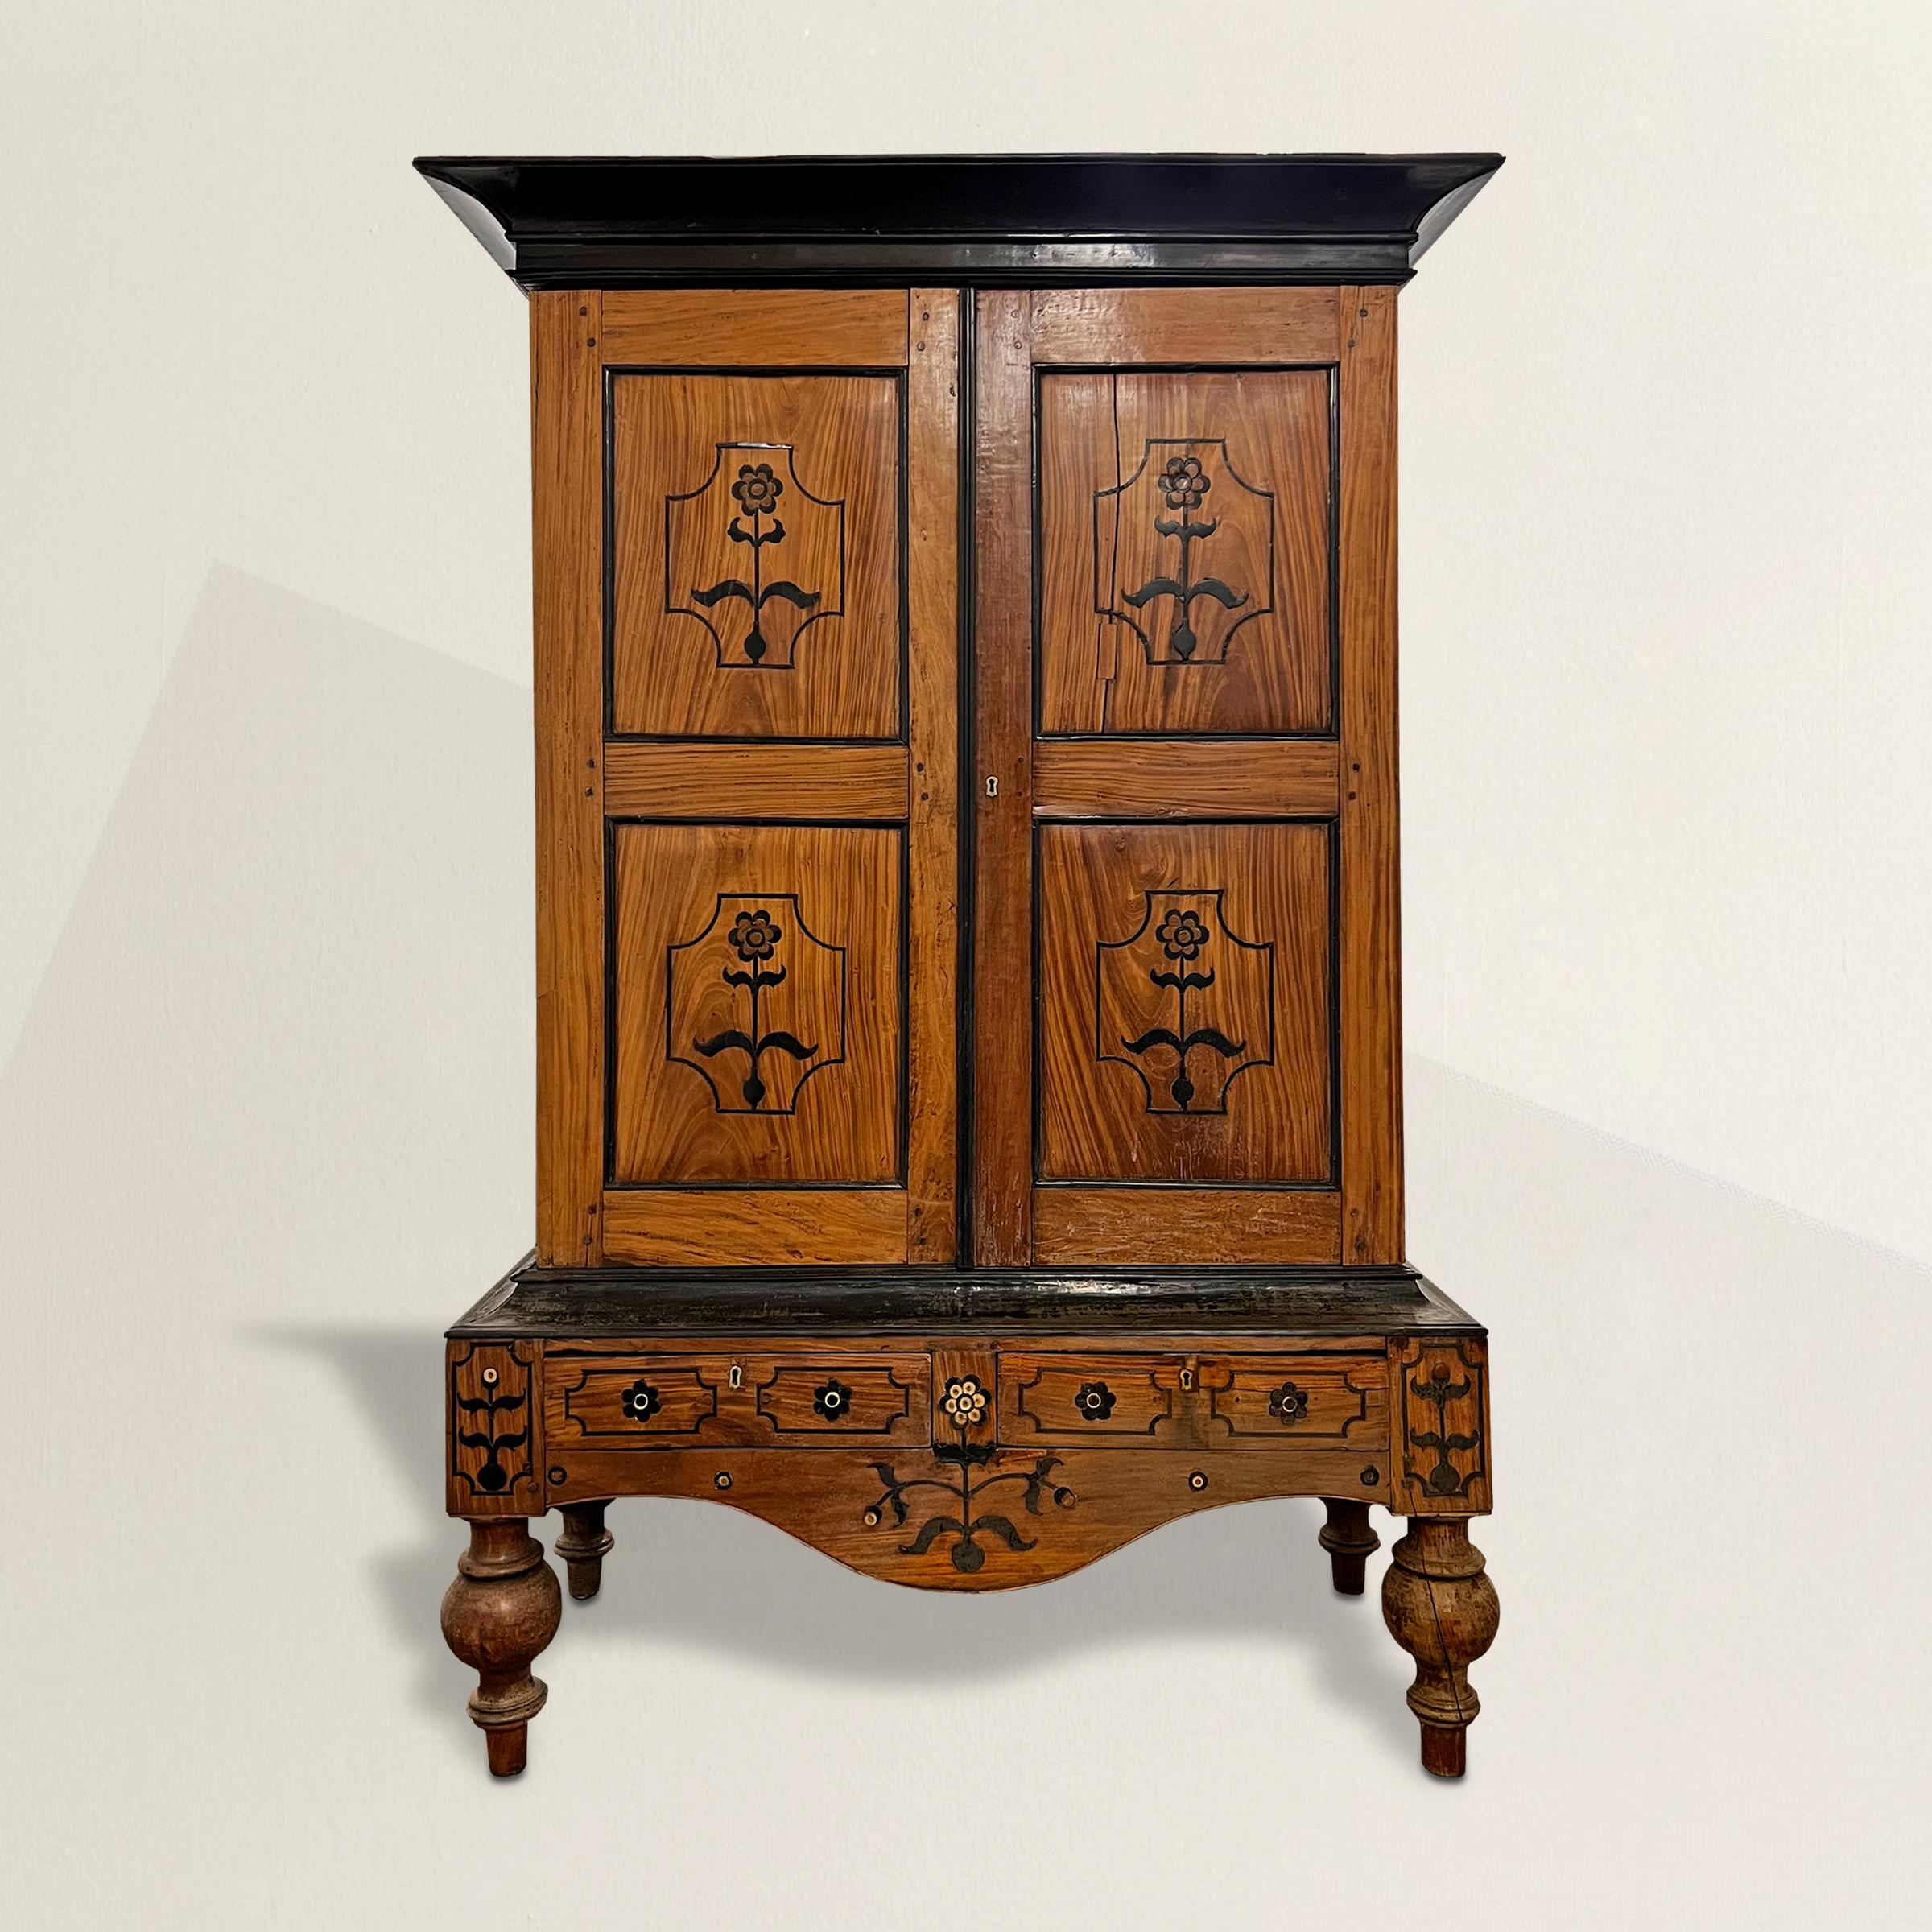 A jaw-dropping and confident 19th century Indian teakwood cabinet with a bold ebonized crown, two doors, each with marquetry inlaid ebonized flowers, a wide apron with two drawers and more inlaid flowers and supported by the most wonderful turned